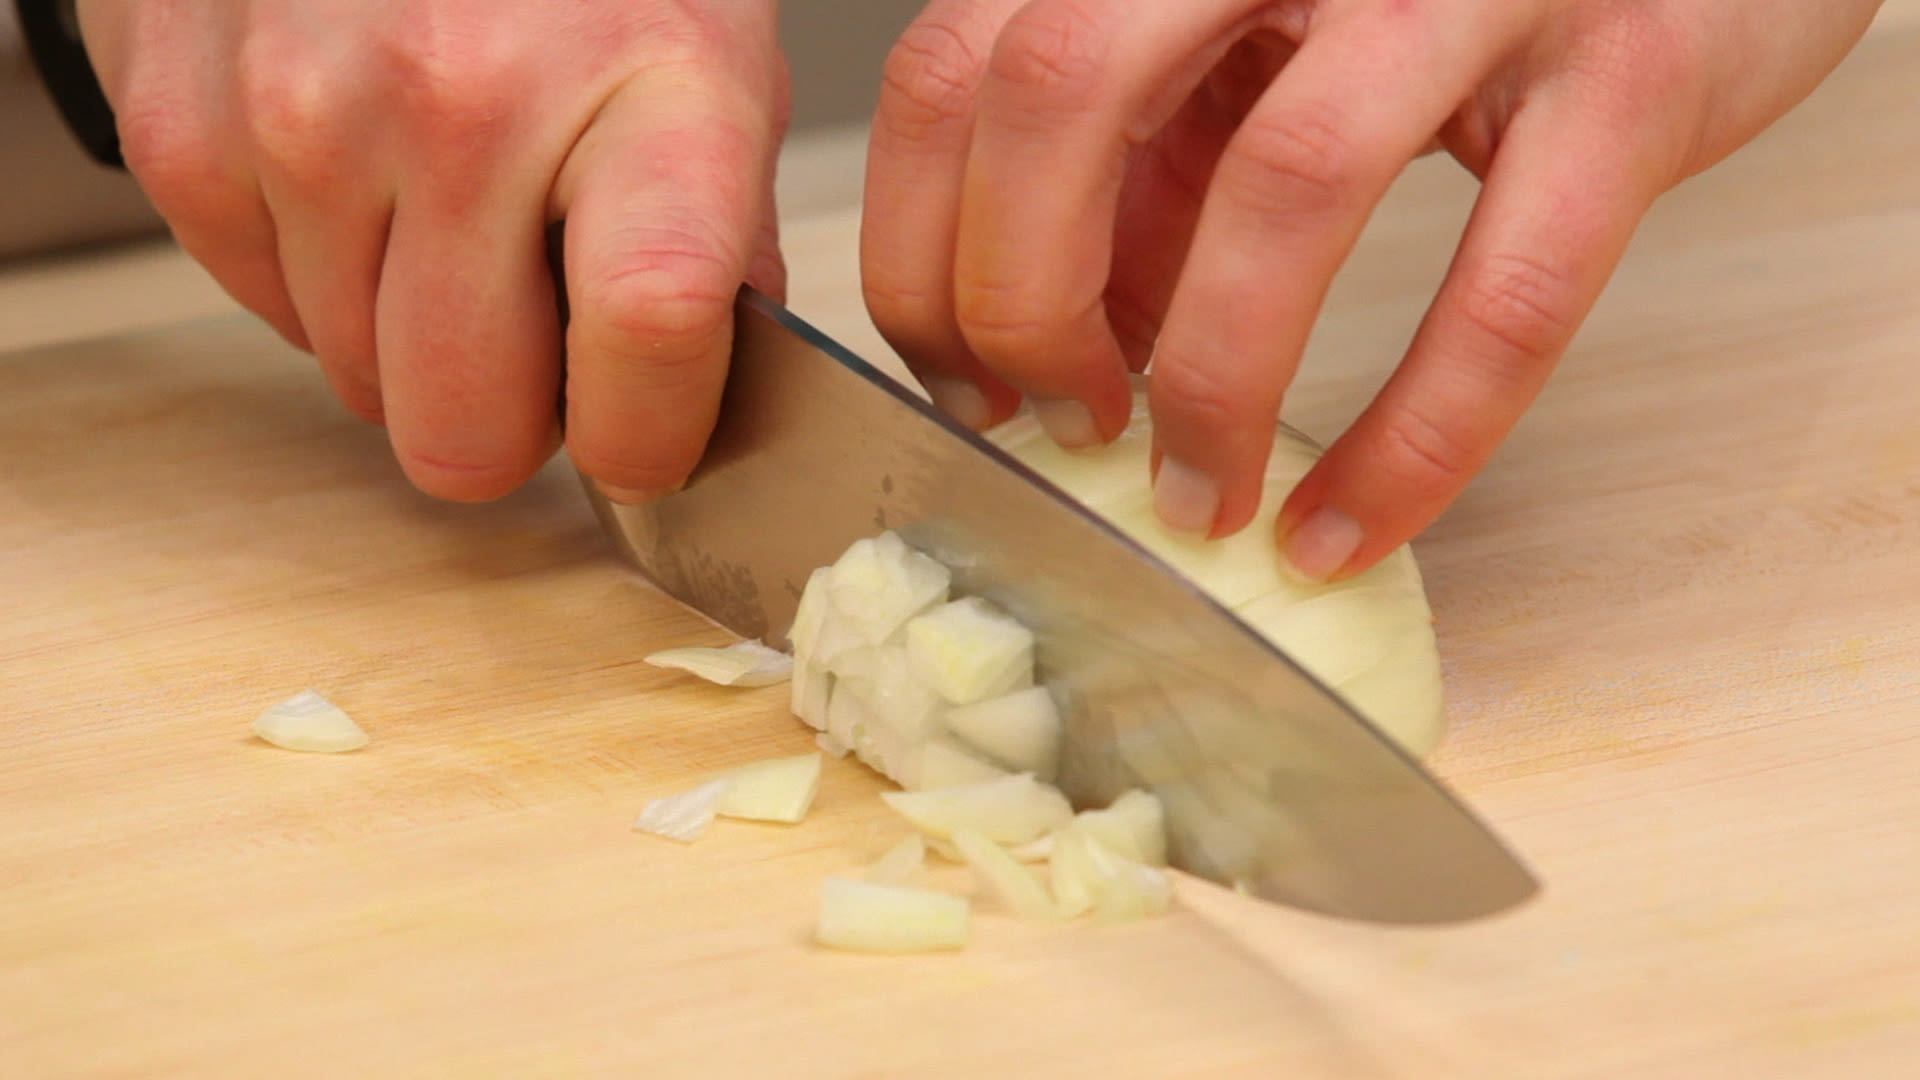 Watch How to Dice, Epicurious Essentials: Cooking How-Tos